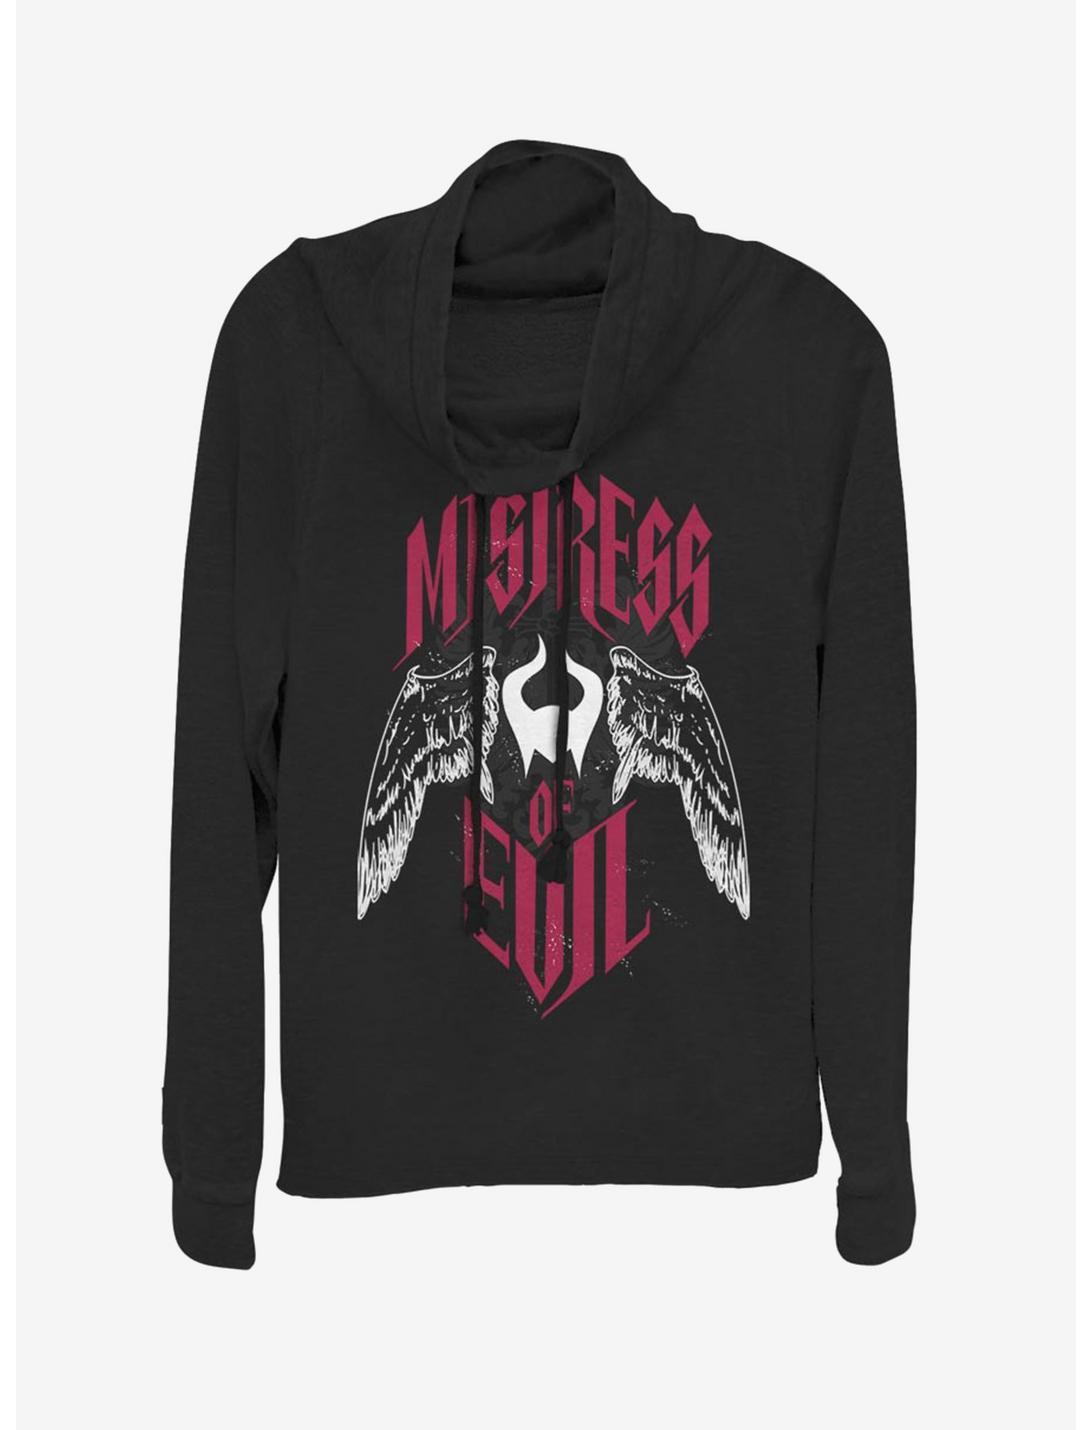 Disney Maleficent: Mistress of Evil With Wings Cowl Neck Long-Sleeve Girls Top, BLACK, hi-res